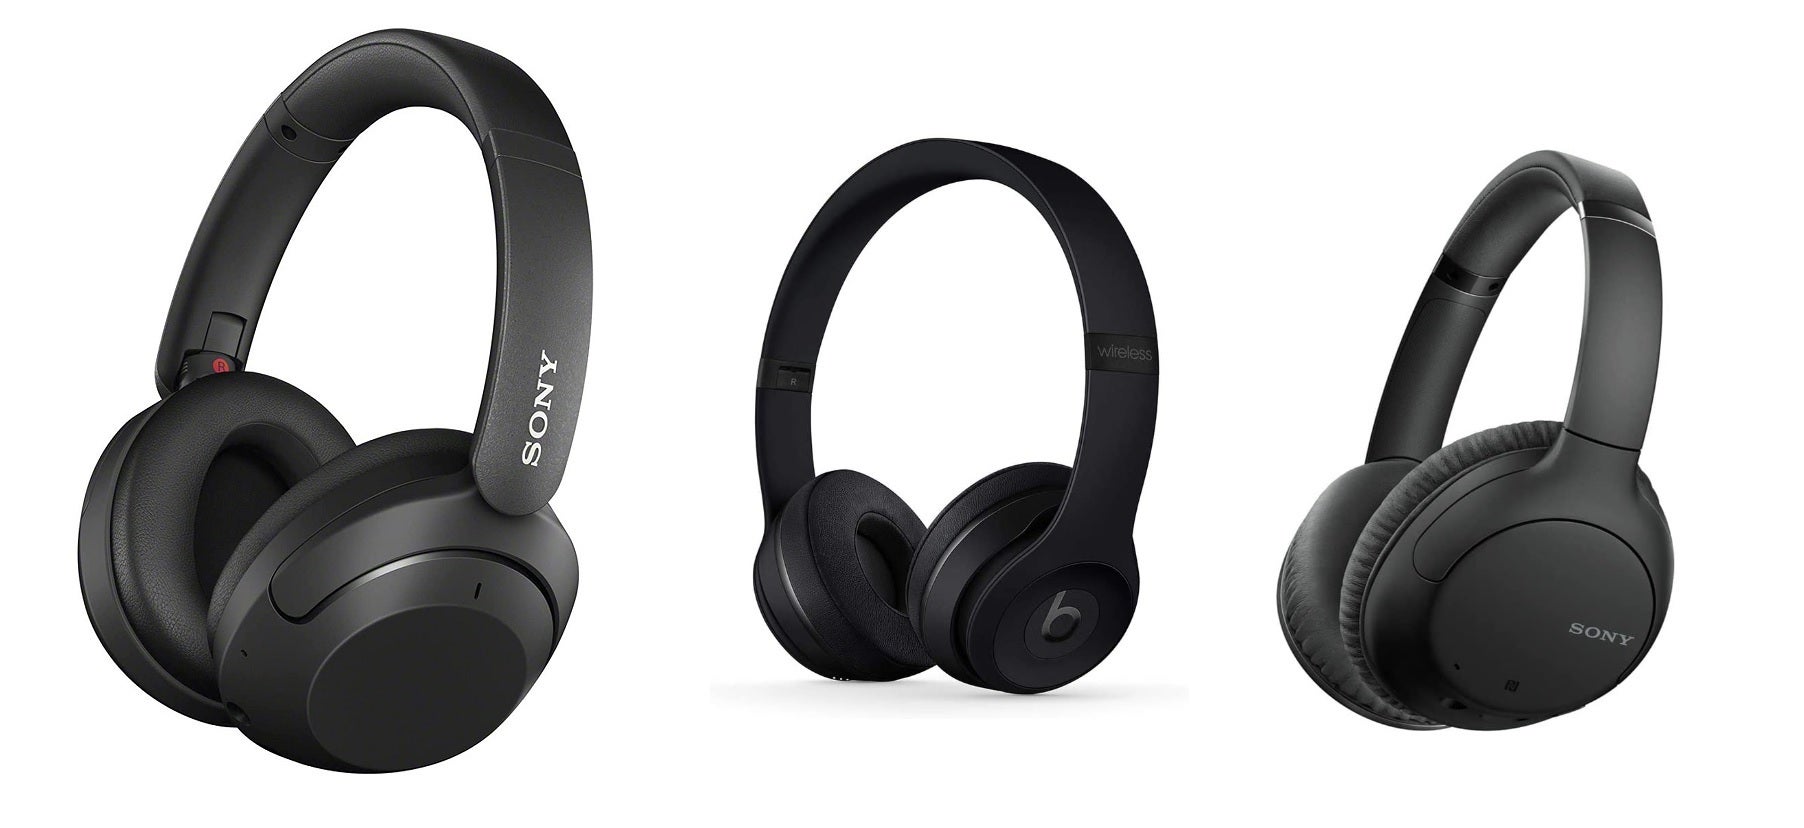 Buying guide: Sony WH-1000XM4 vs Bose QuietComfort 45 vs Bose 700 and Sony WH-XB910N vs Solo3 vs Sony WH-CH710N PhoneArena